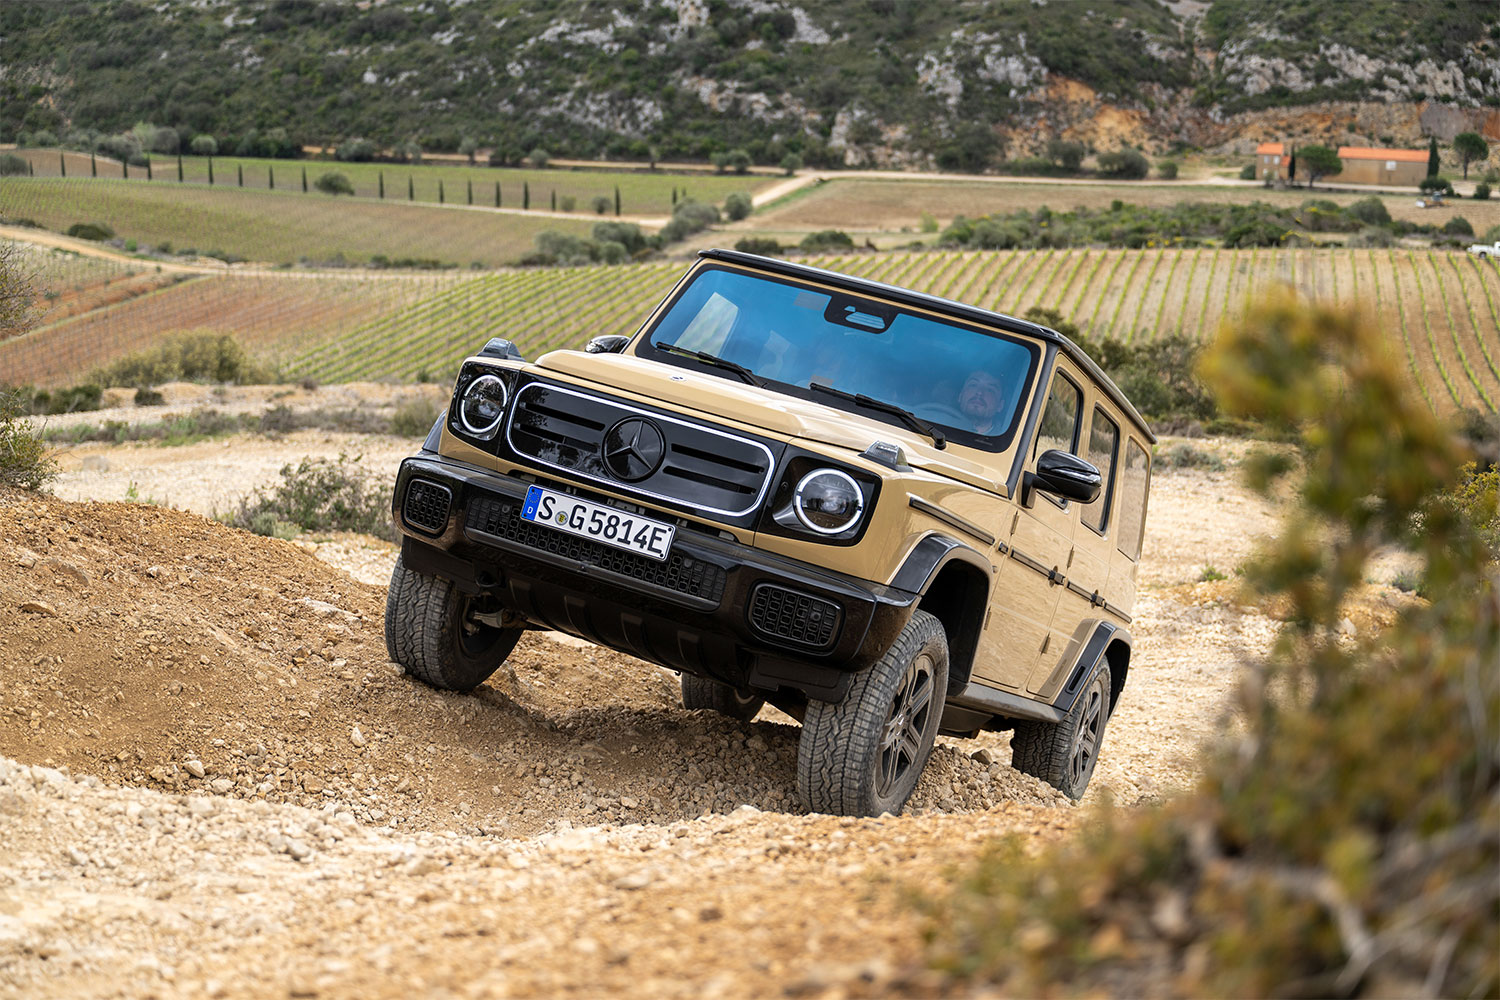 Mercedes-Benz G 580 with EQ Technology, the first electric G-Class SUV, also known as the G-Wagen